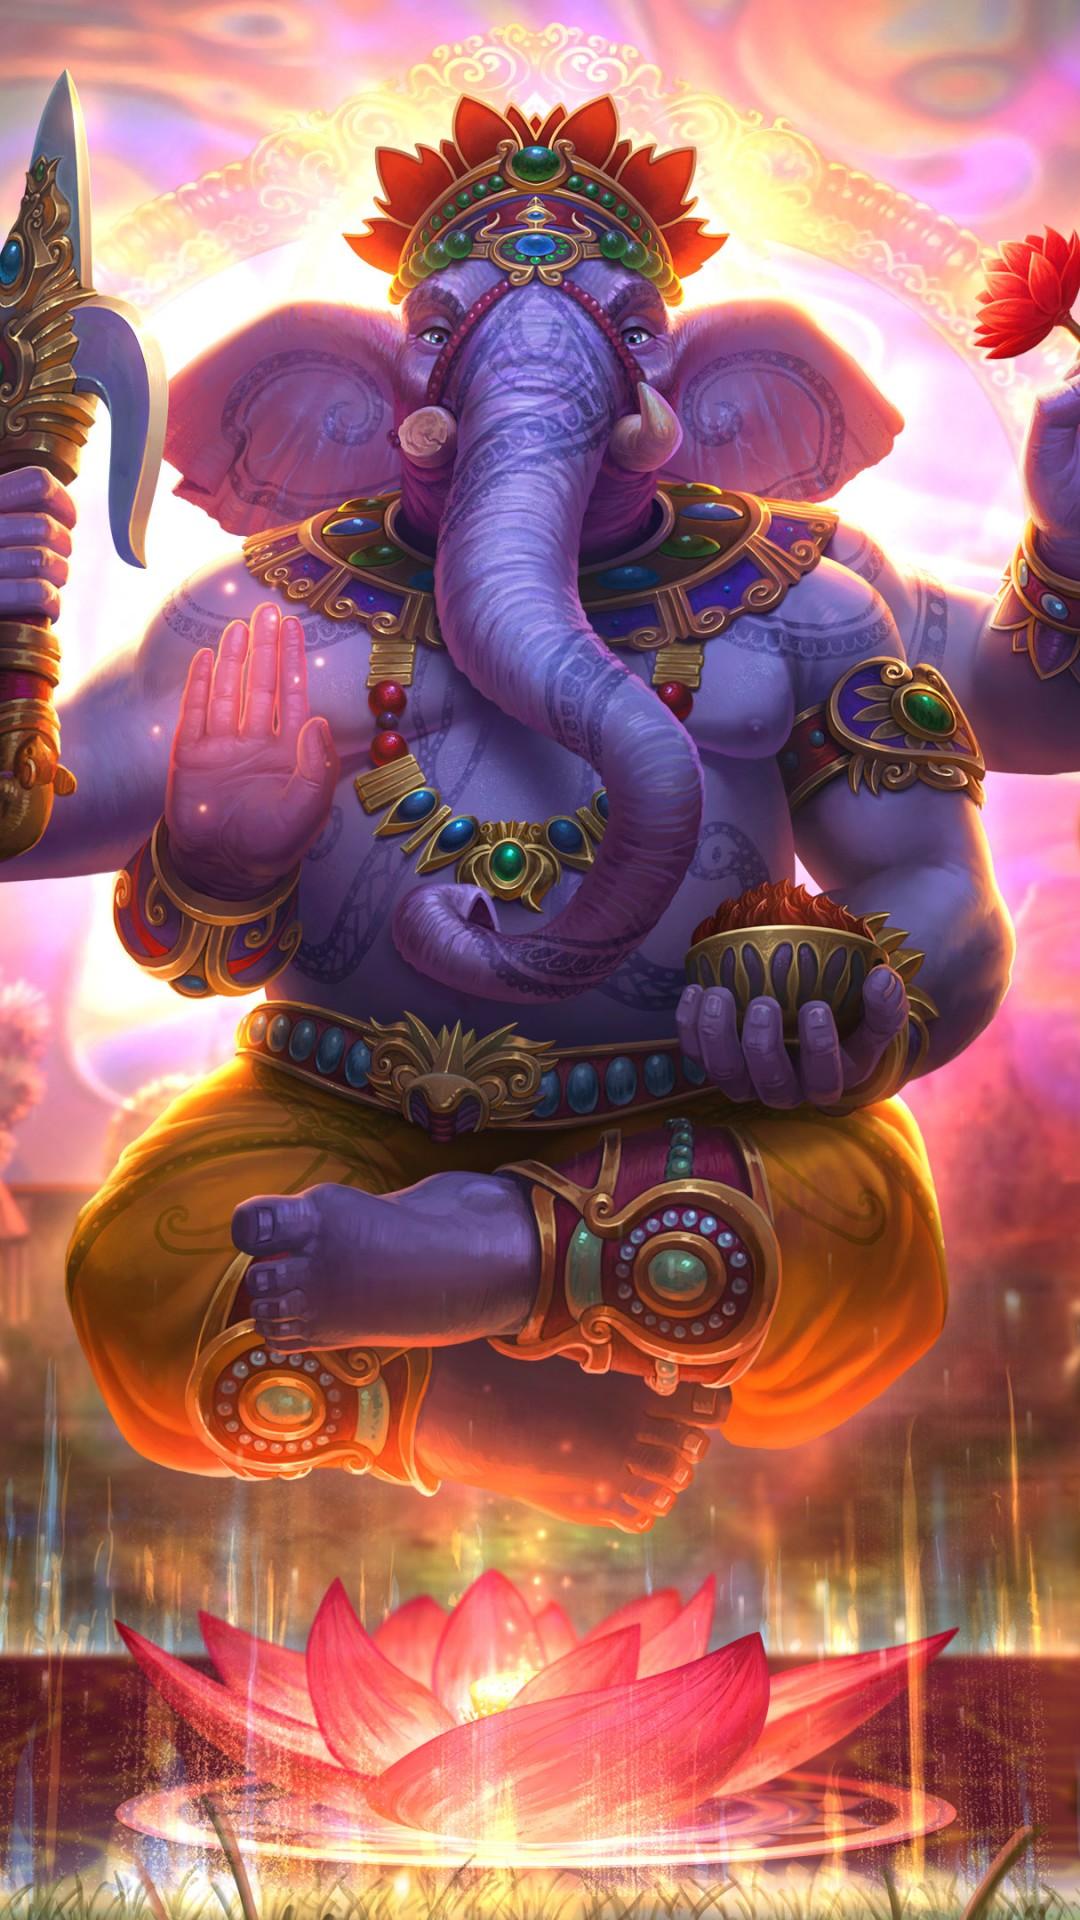 Lord Ganesha The God of Success in Smite 4K Wallpaper. HD